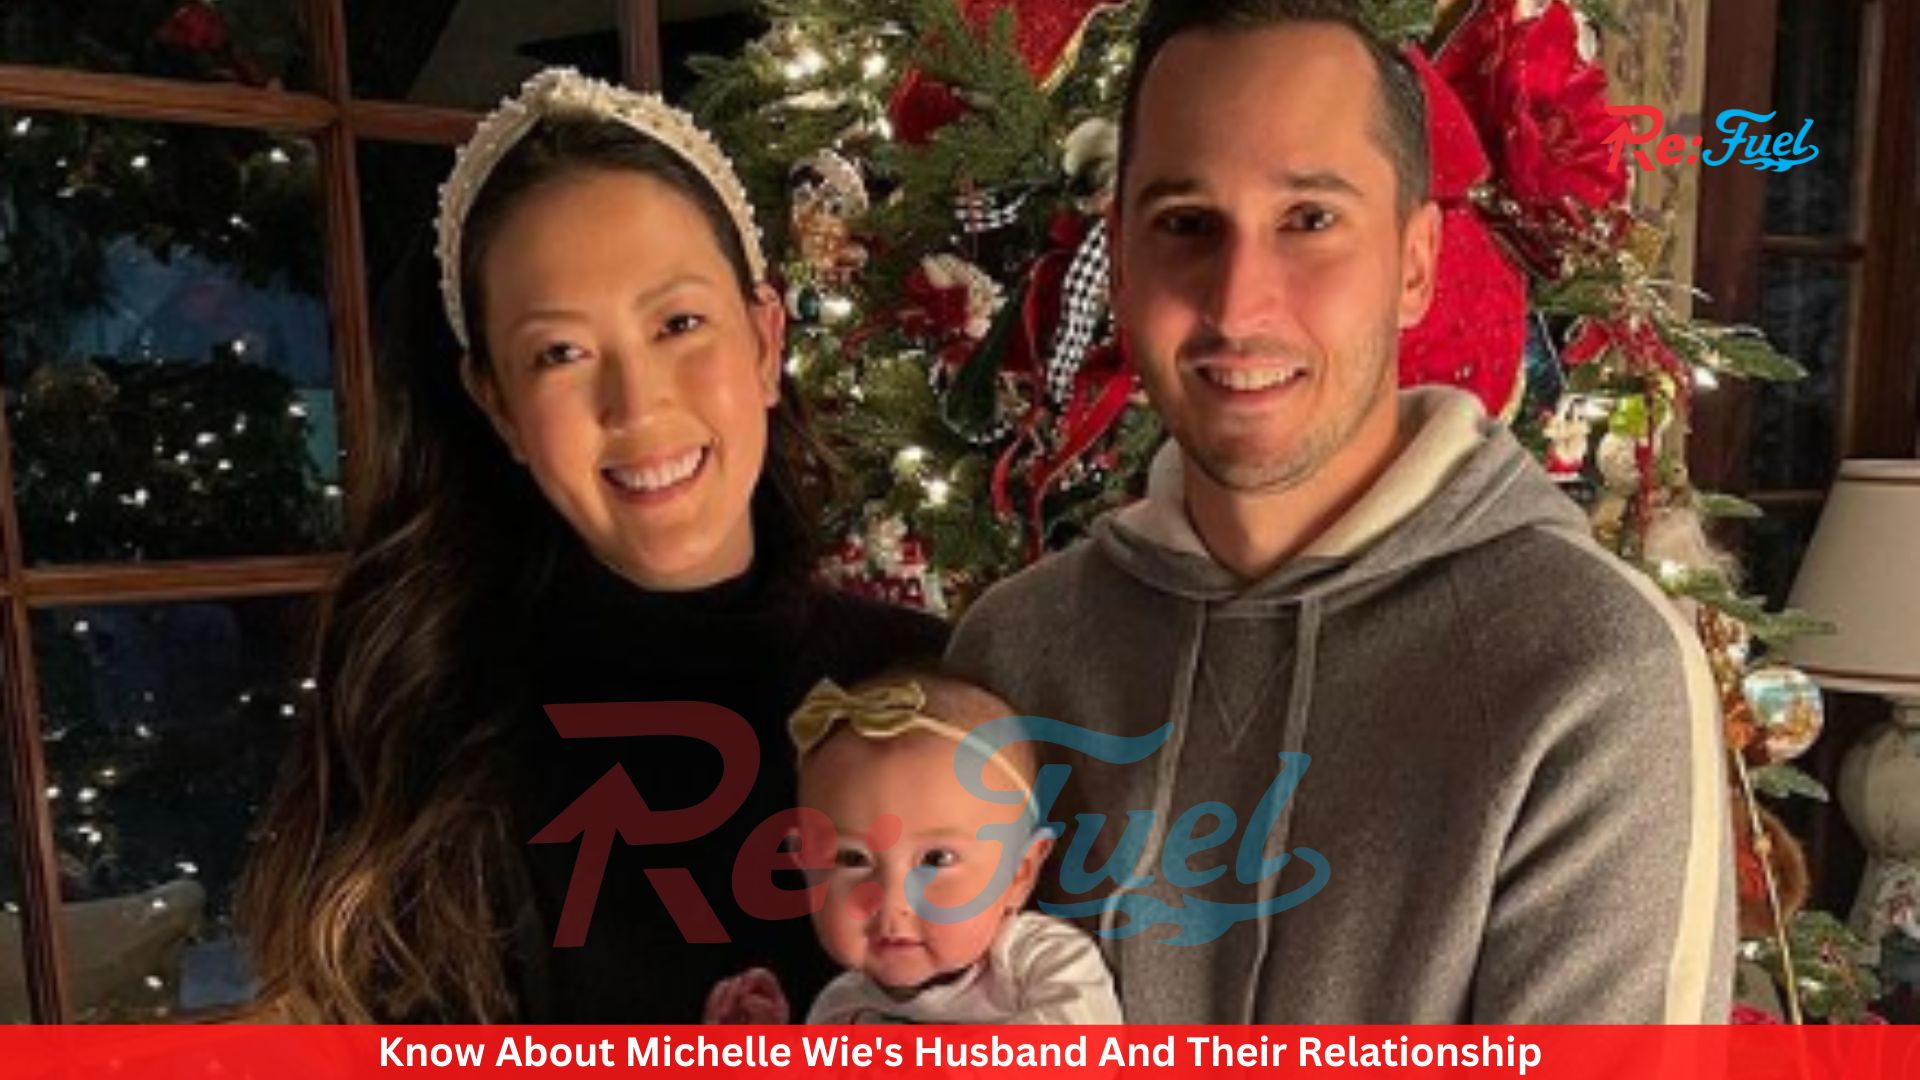 Know About Michelle Wie's Husband And Their Relationship